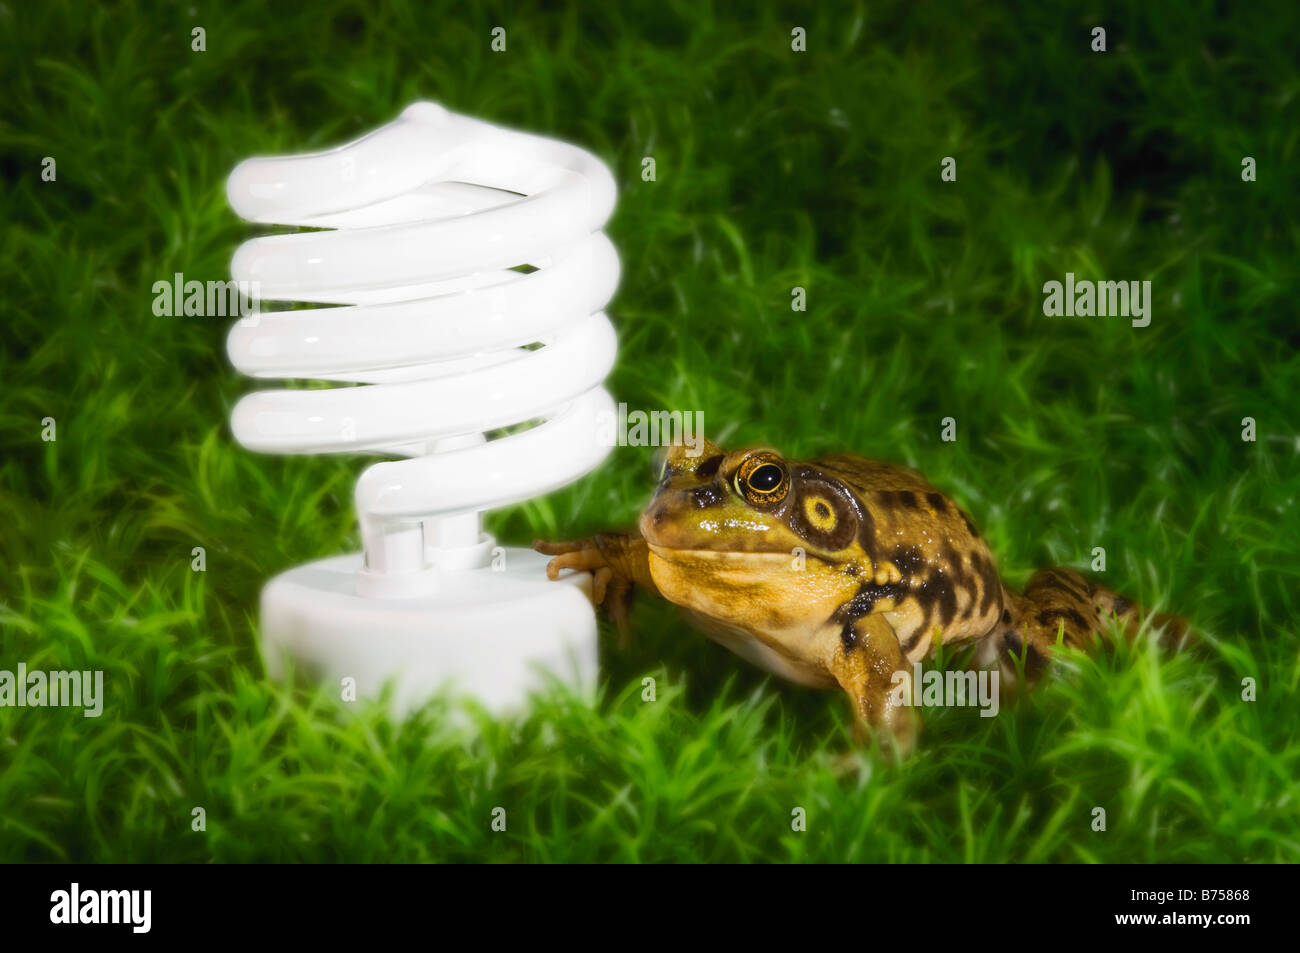 Energy-saving light bulb inspected by green frog, Halifax, Canada Stock Photo